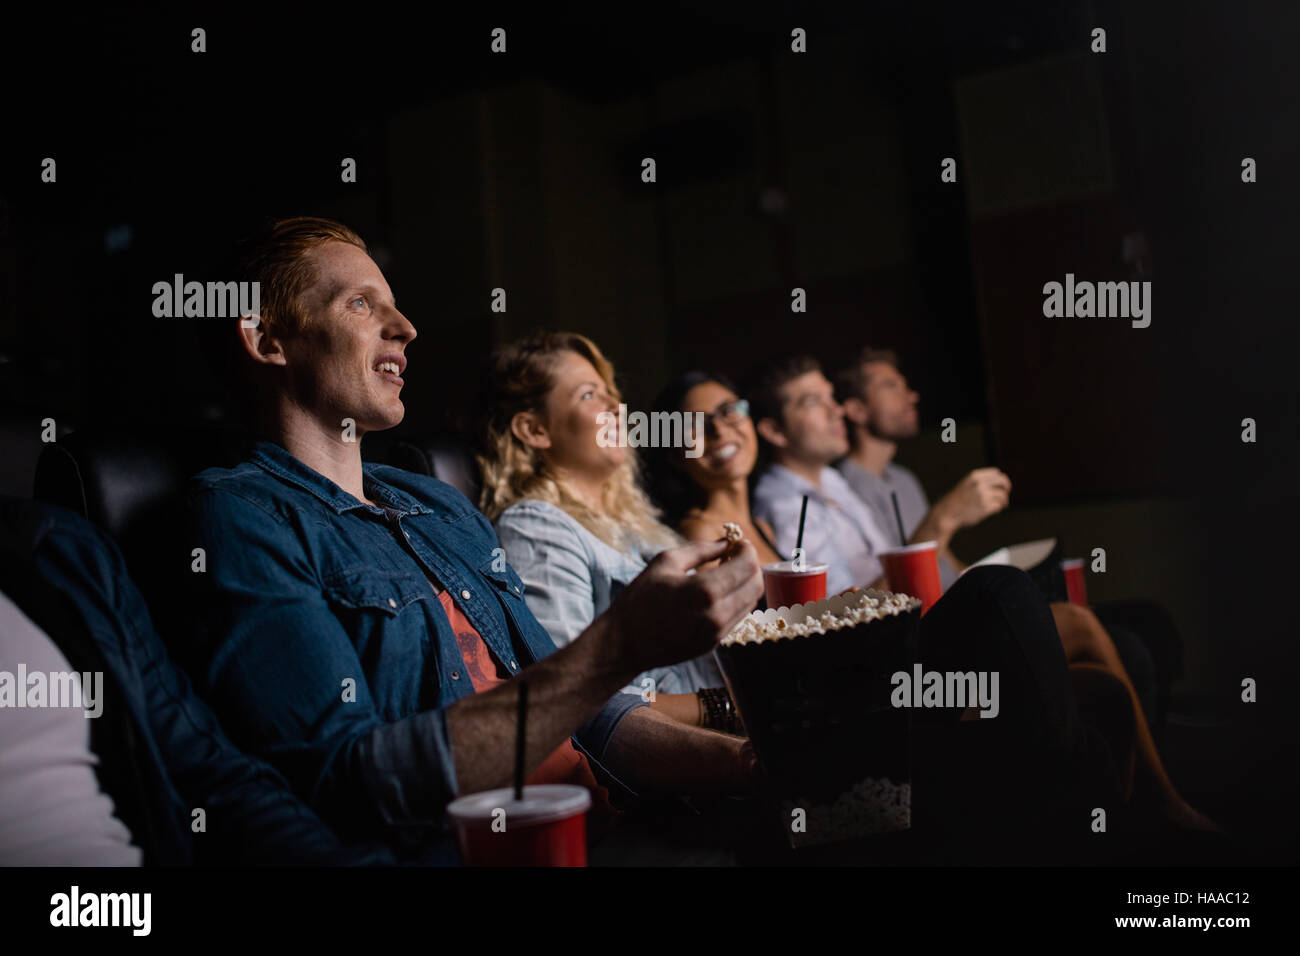 Group of friends sitting in multiplex movie theater with popcorn and drinks. Young people watching movie in cinema. Stock Photo